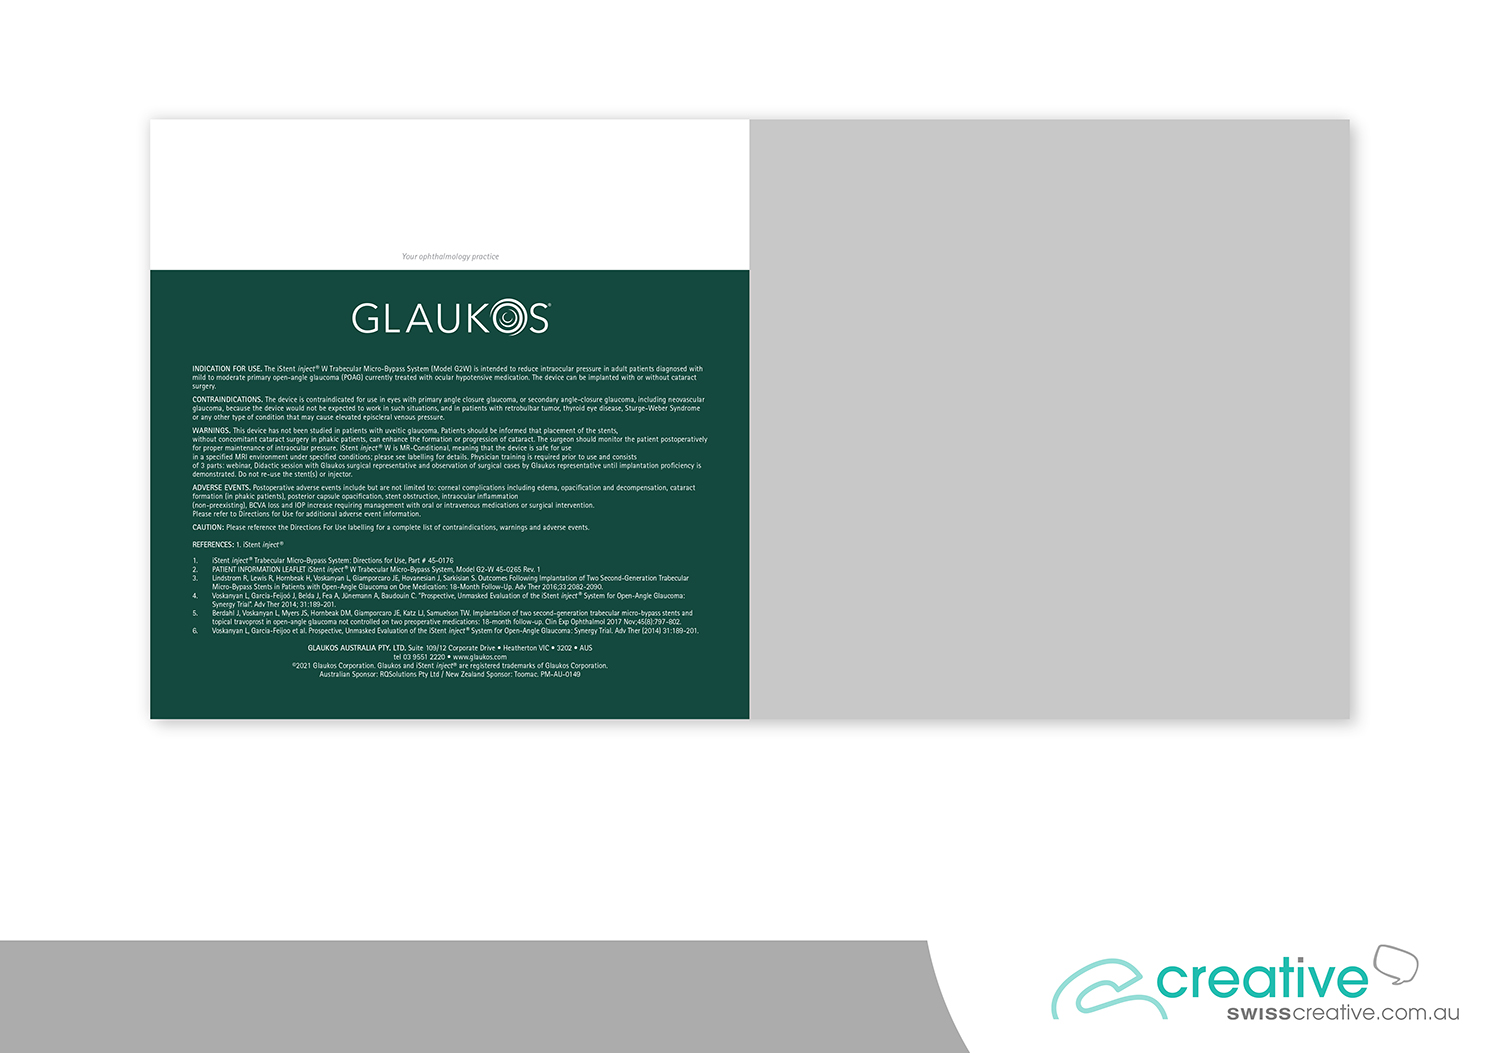 GLAUKOS, FOR PATIENTS WITH GLAUCOMA